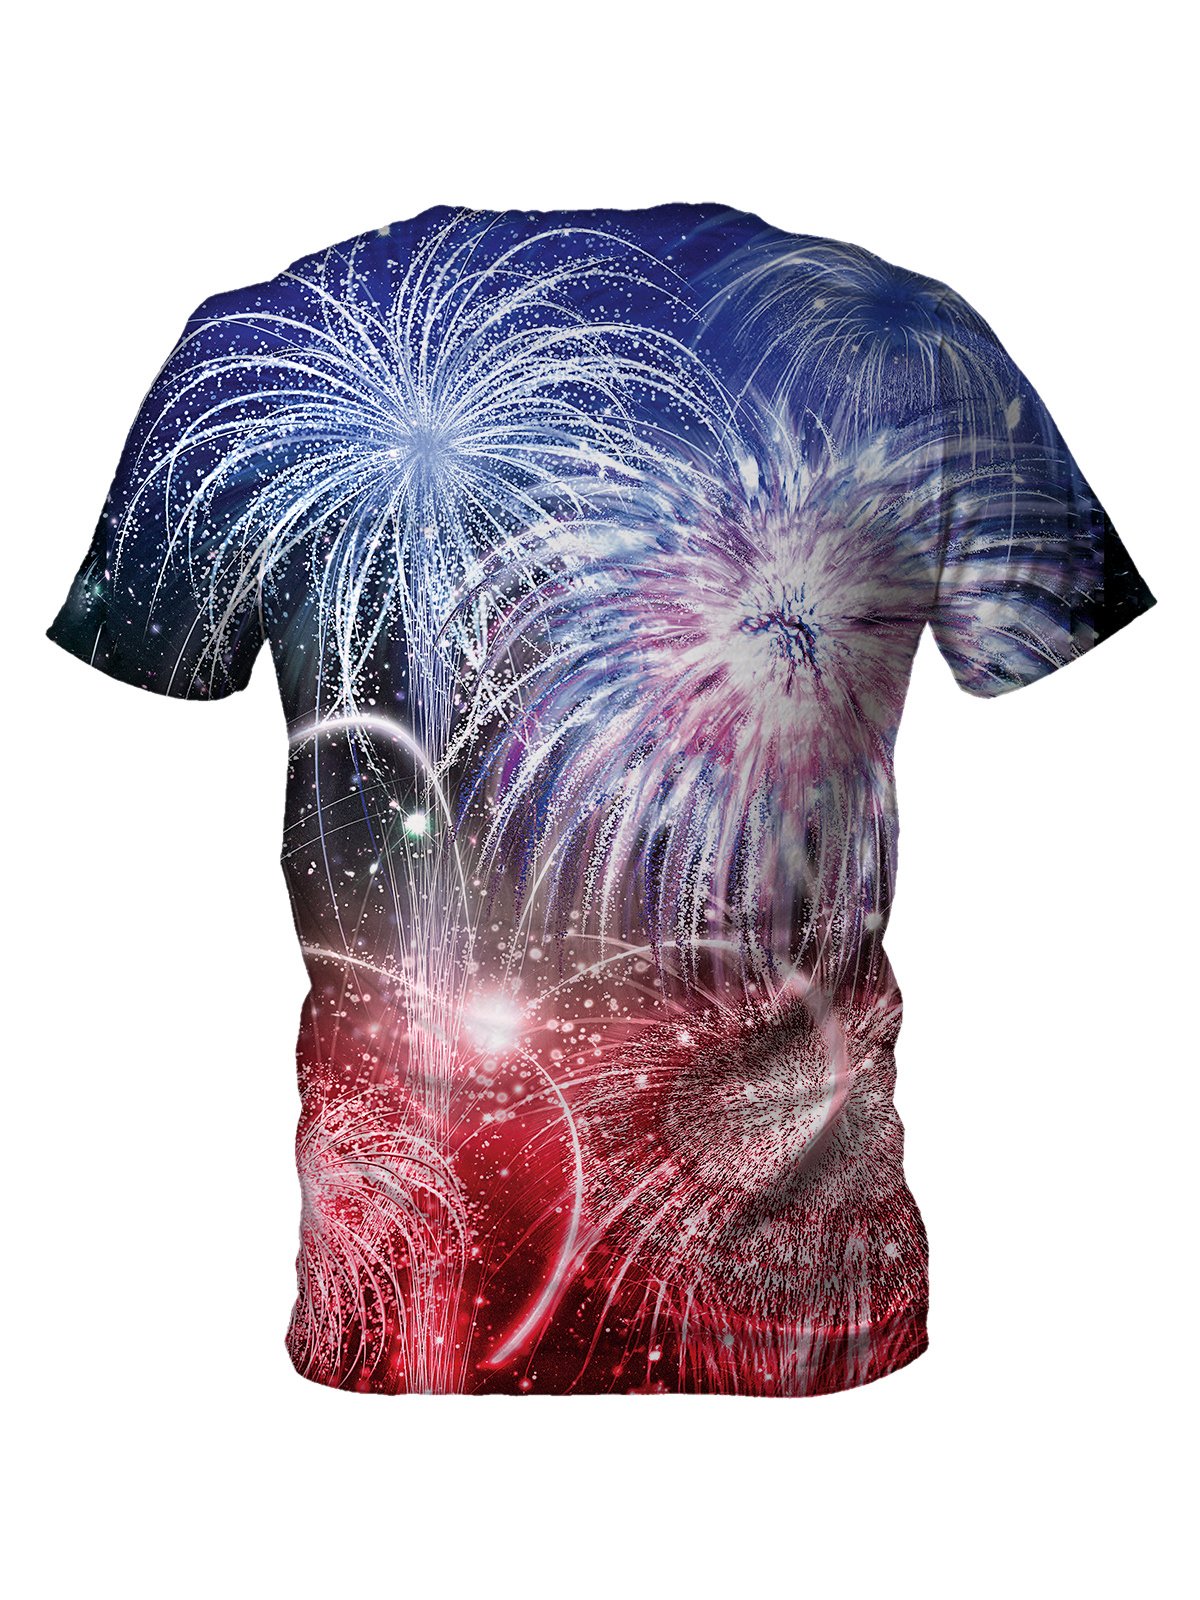 Back view of all over print psychedelic 4th of July t shirt by Gratefully Dyed Apparel. 